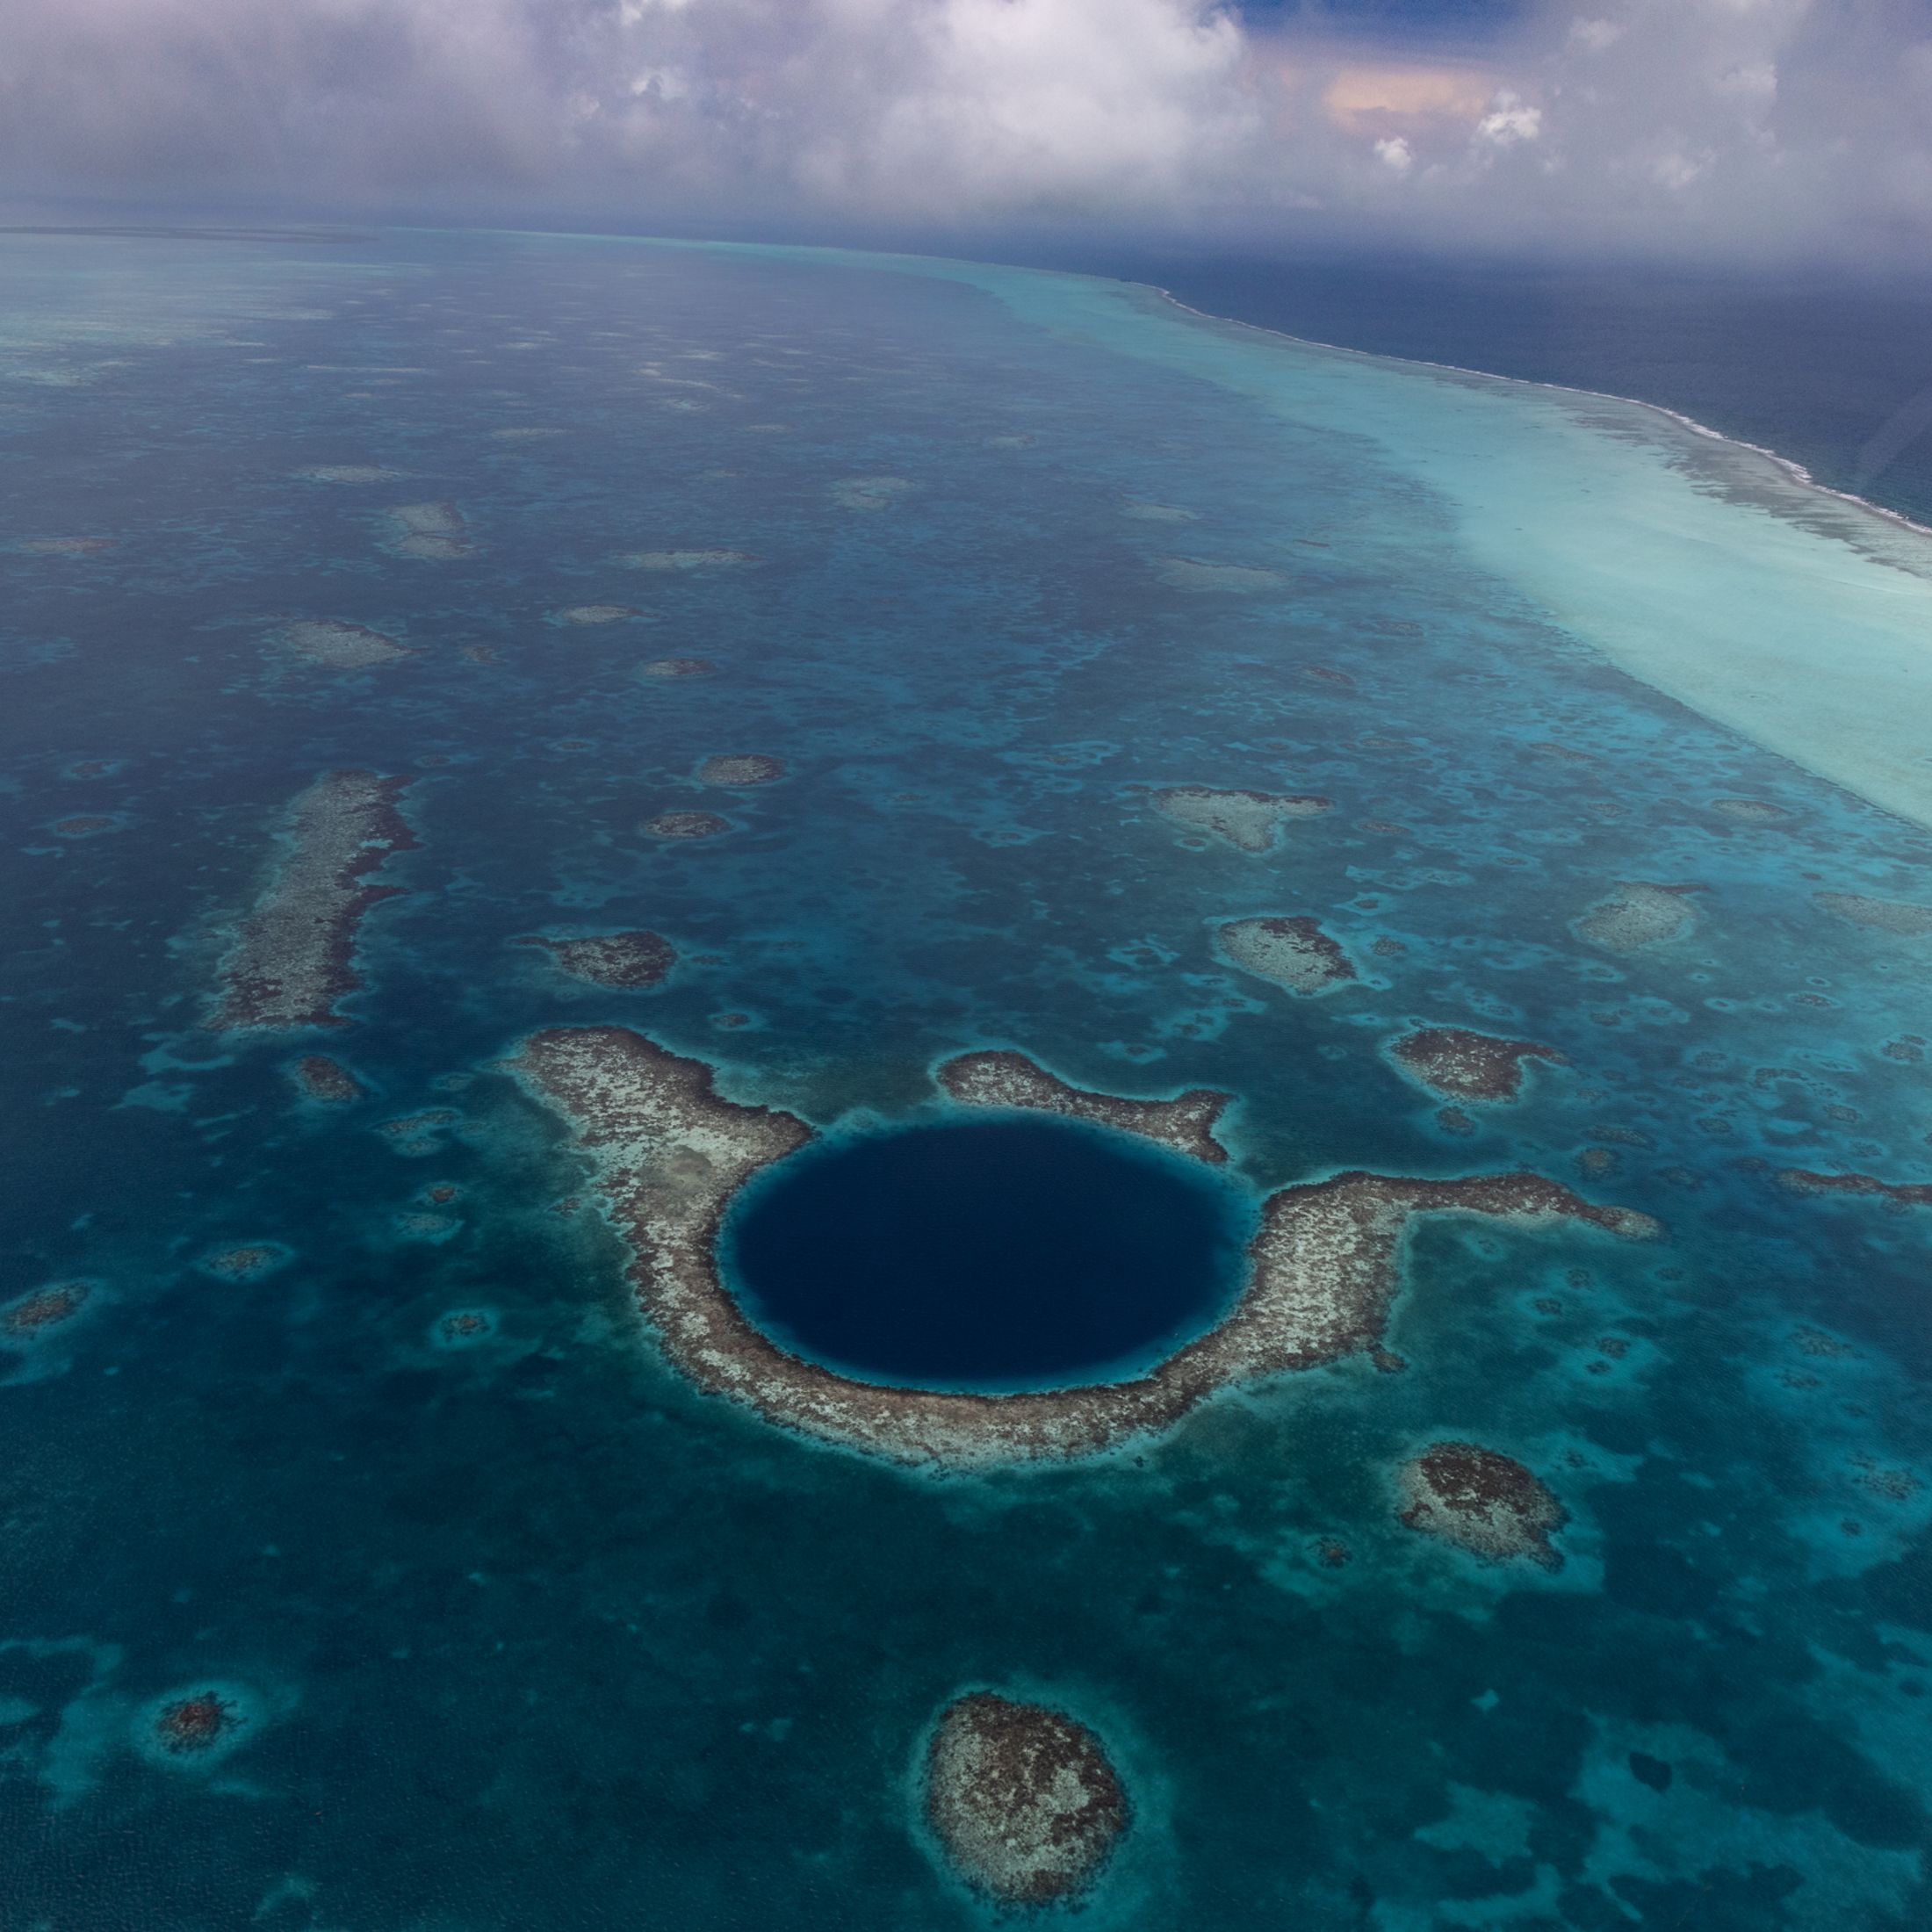 The Great Blue Hole is a circle of darker blue off the coast of Belize.